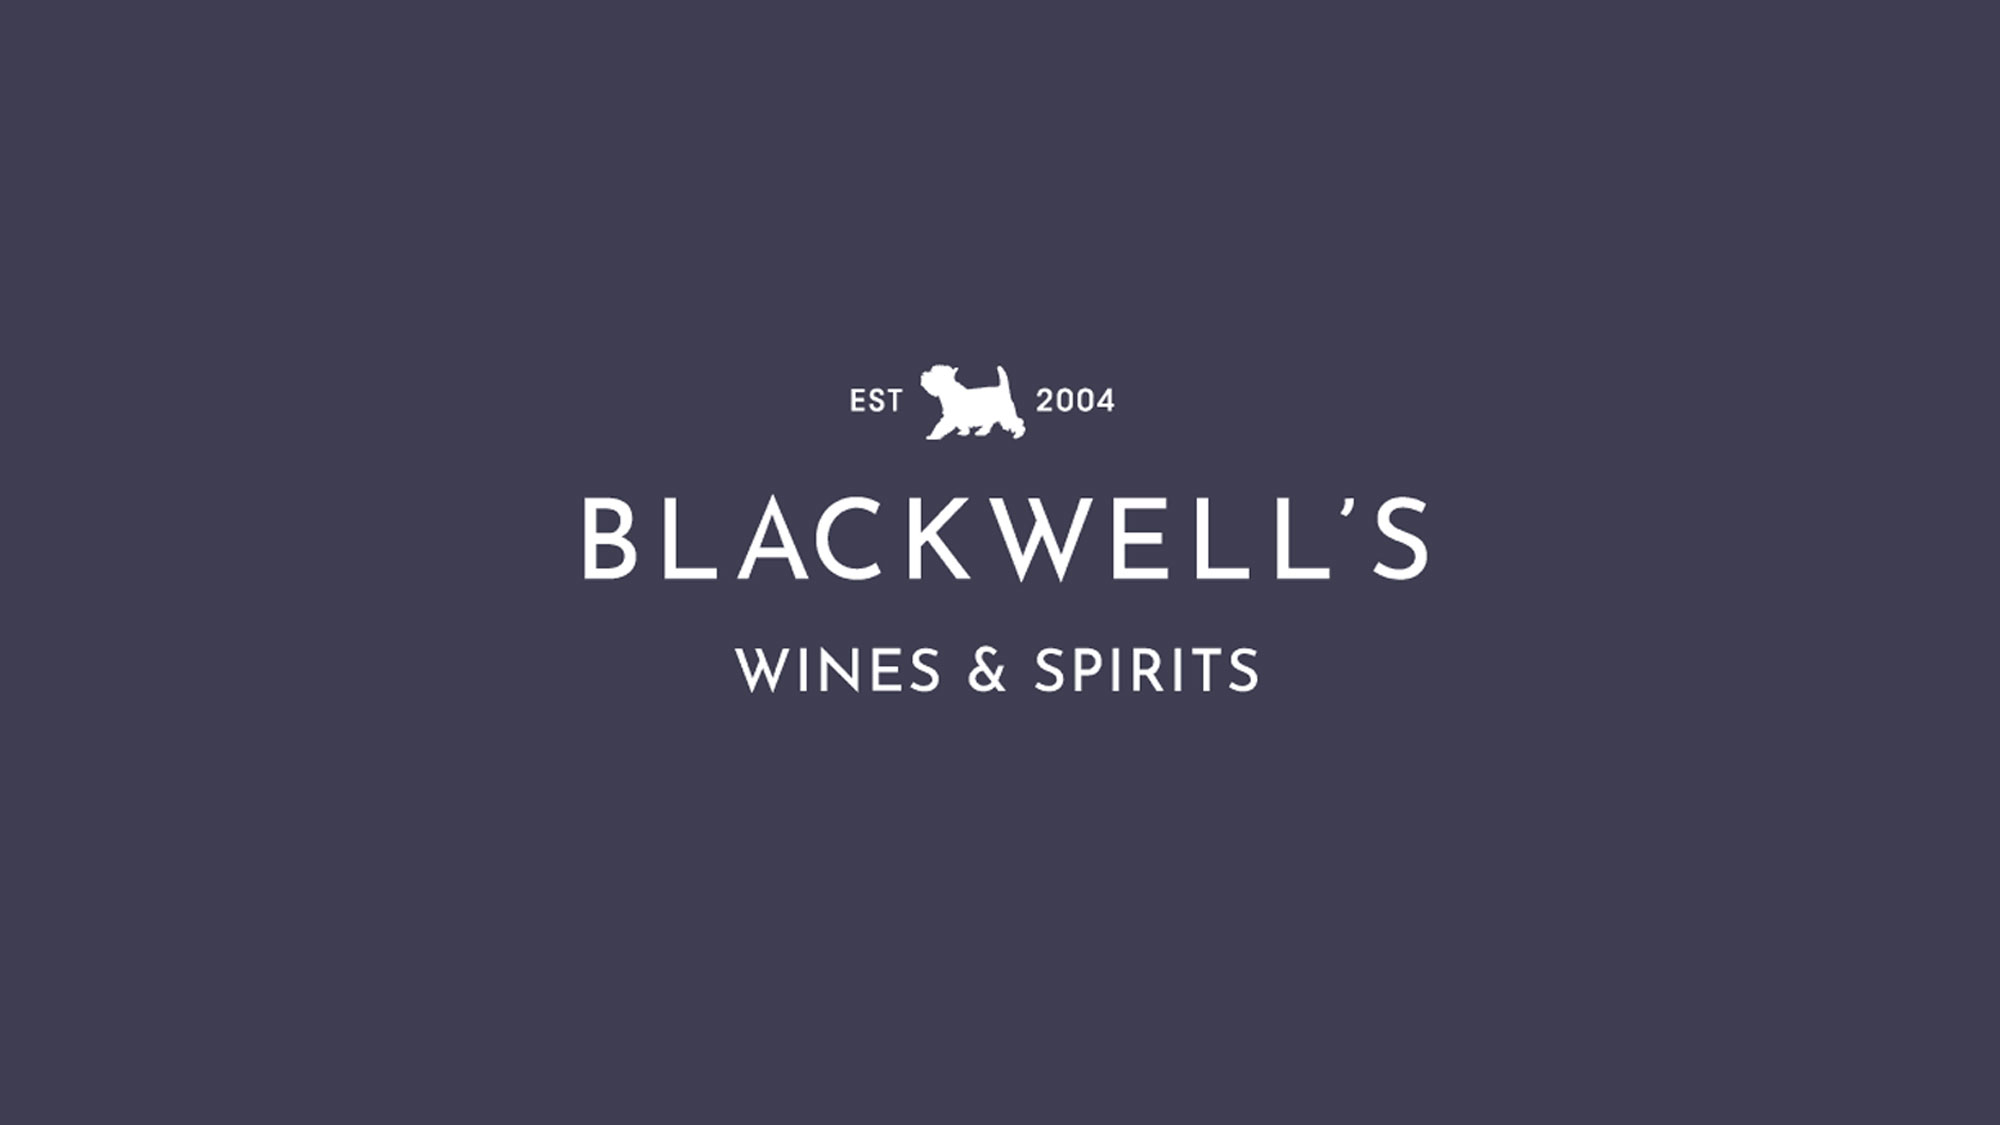 Blackwell's wines and spirits